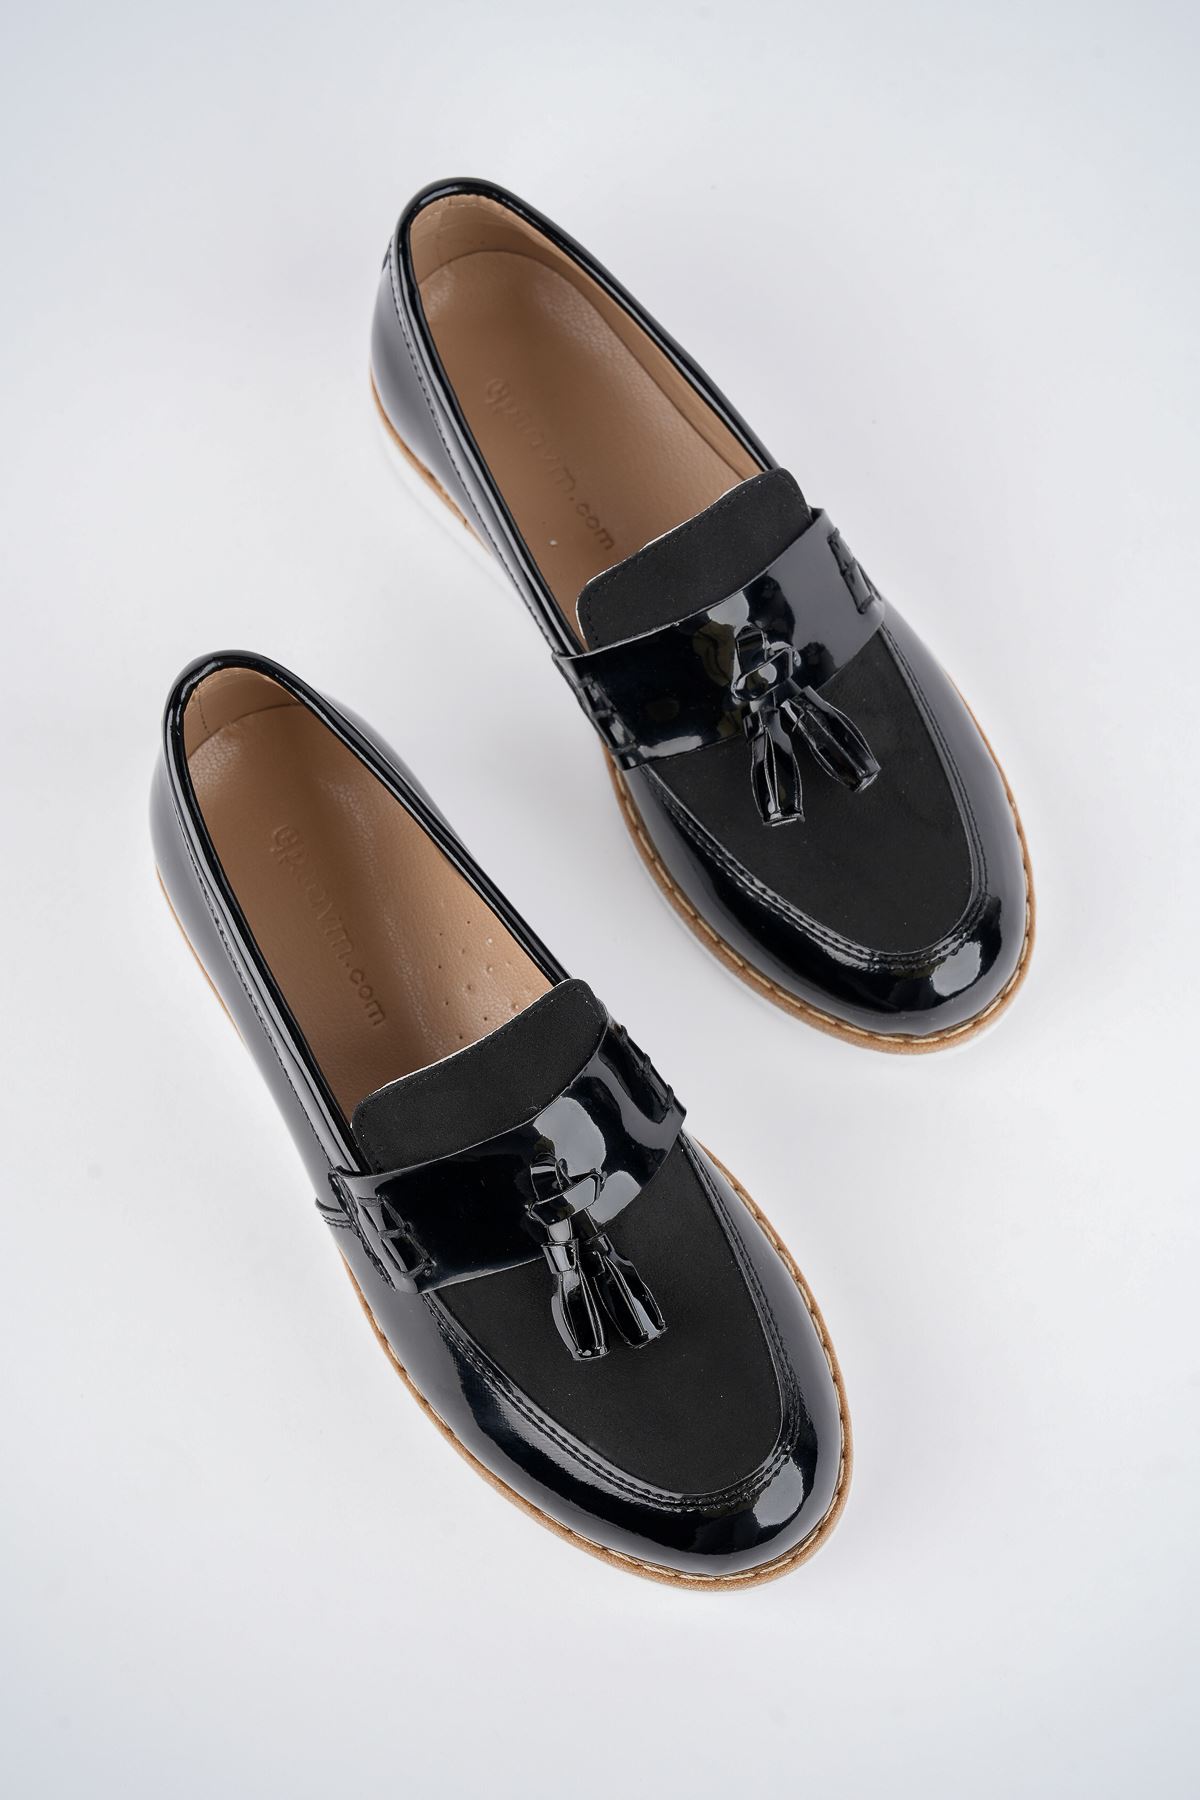 Tasseled Black and White Sole Children's Shoes